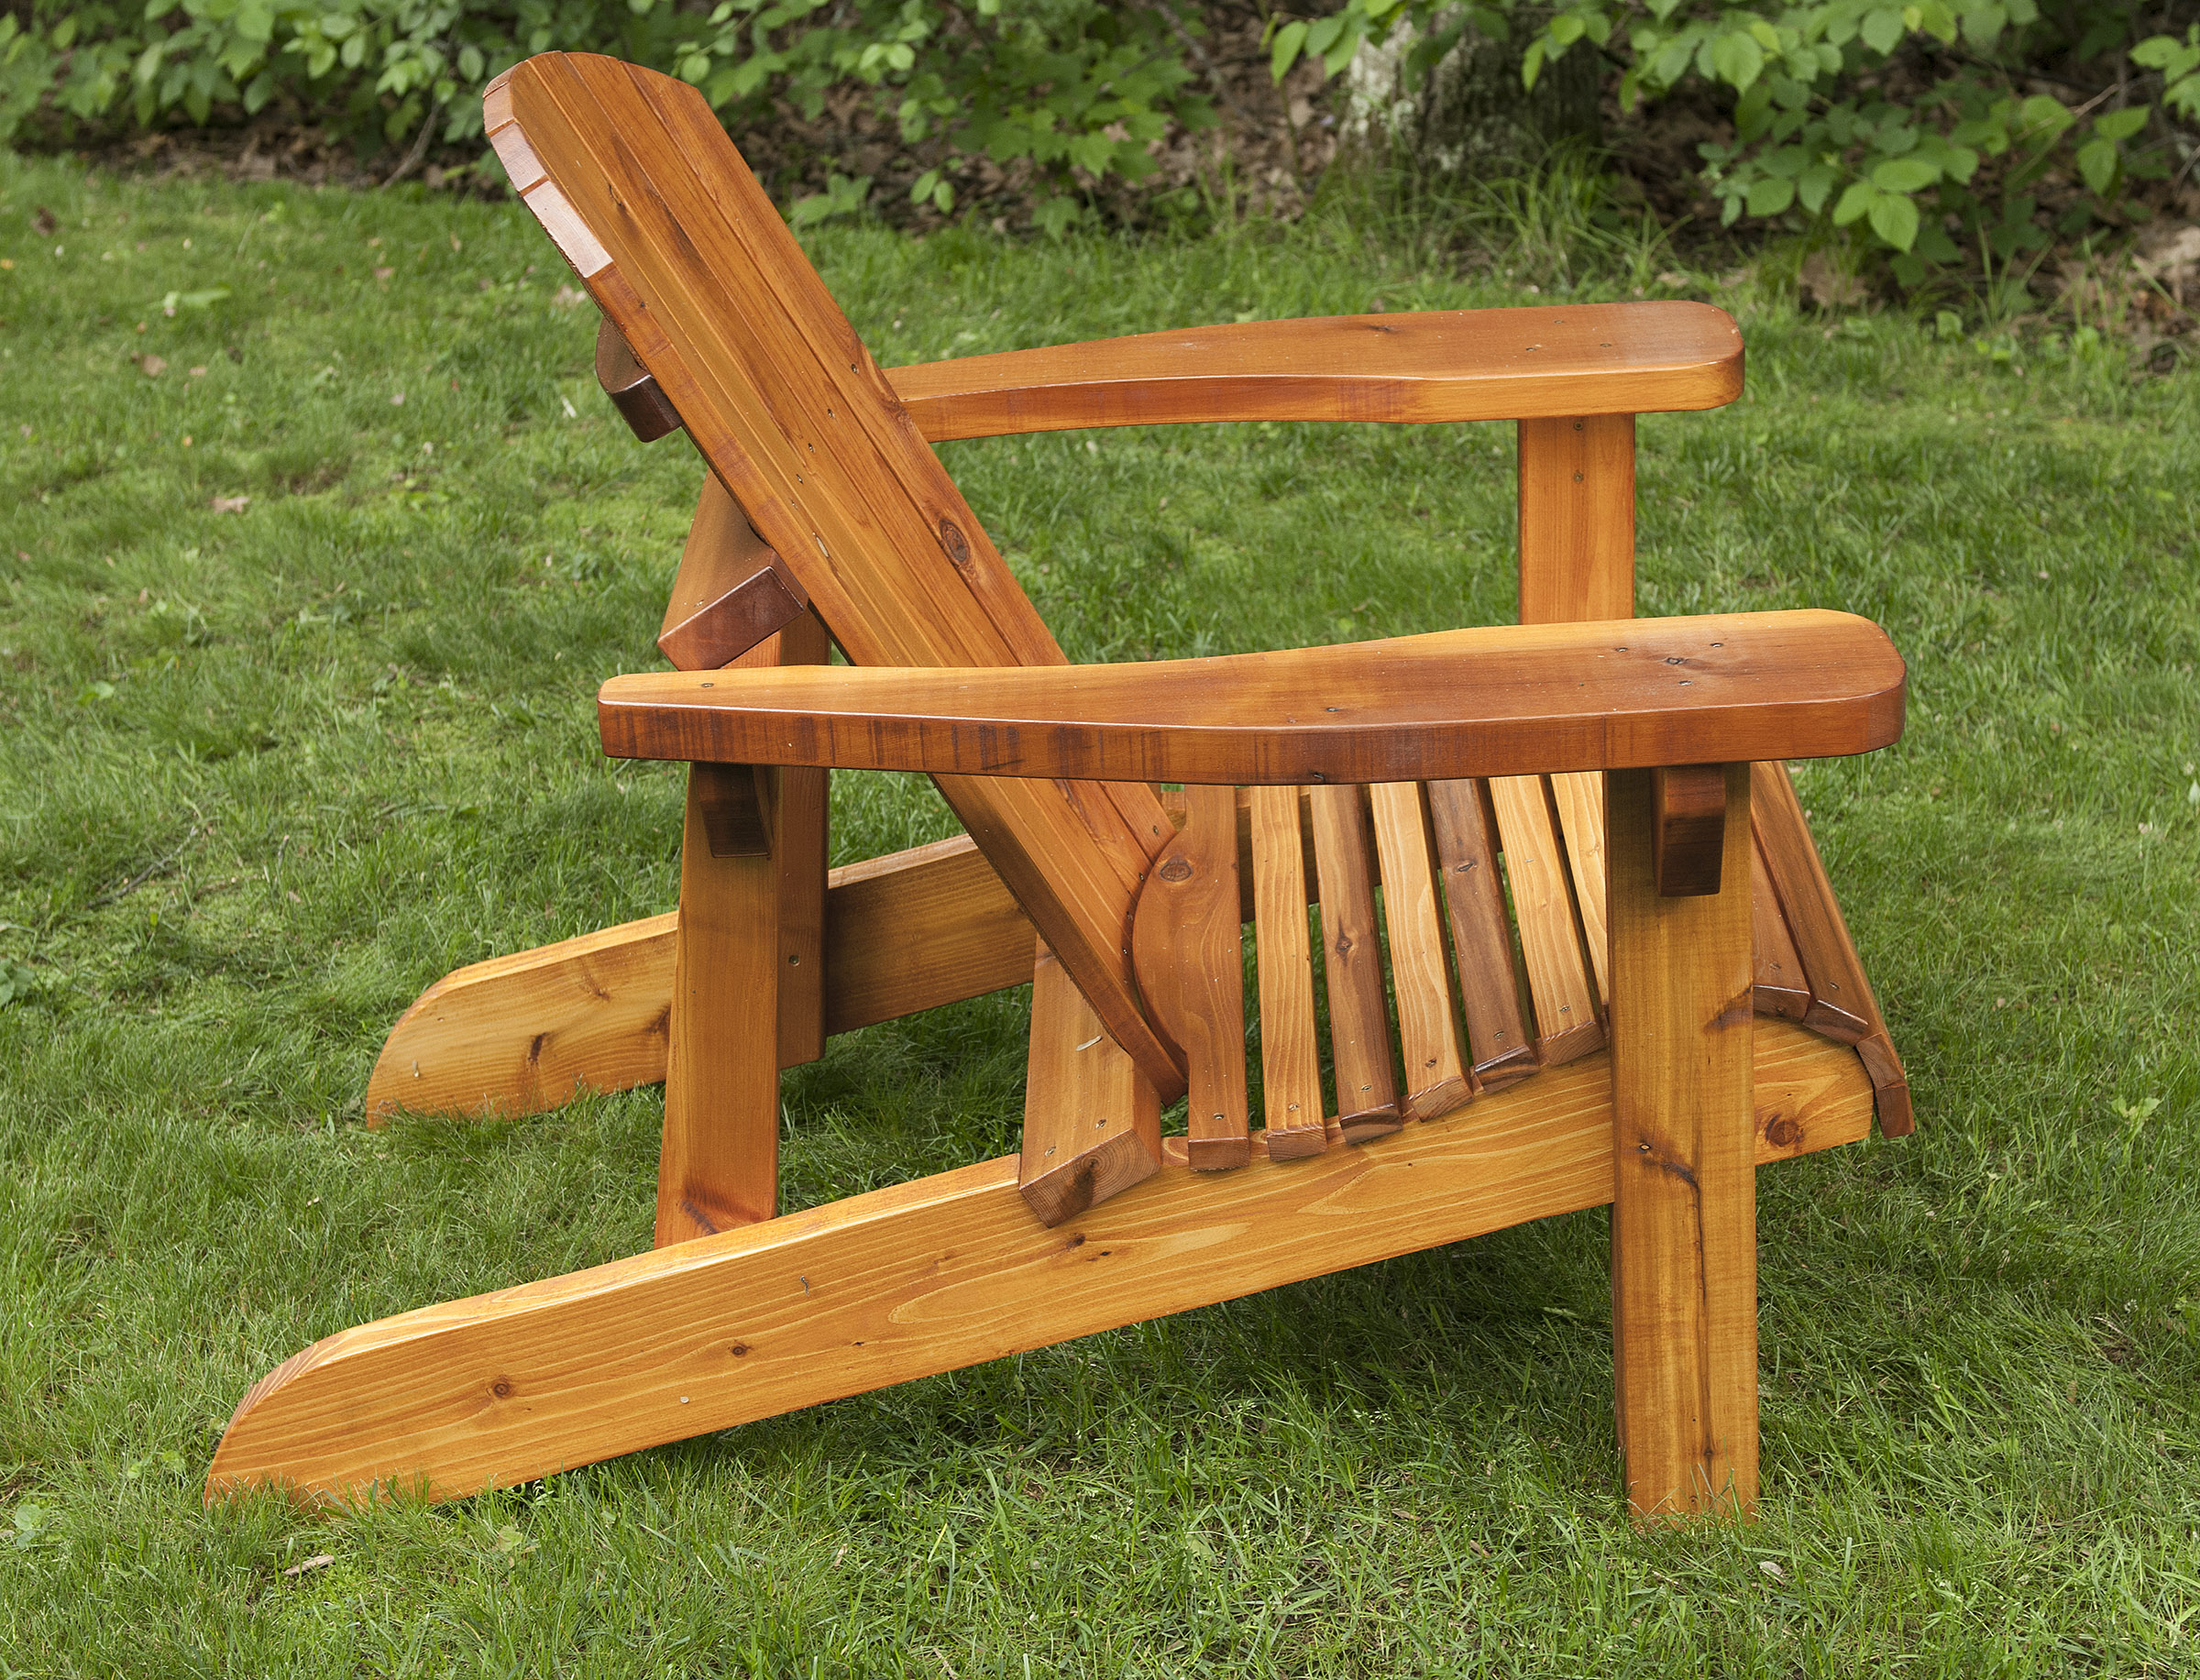 Cedar Adirondack Chairs - FREE LISTING-FOR SALE! List Your ...